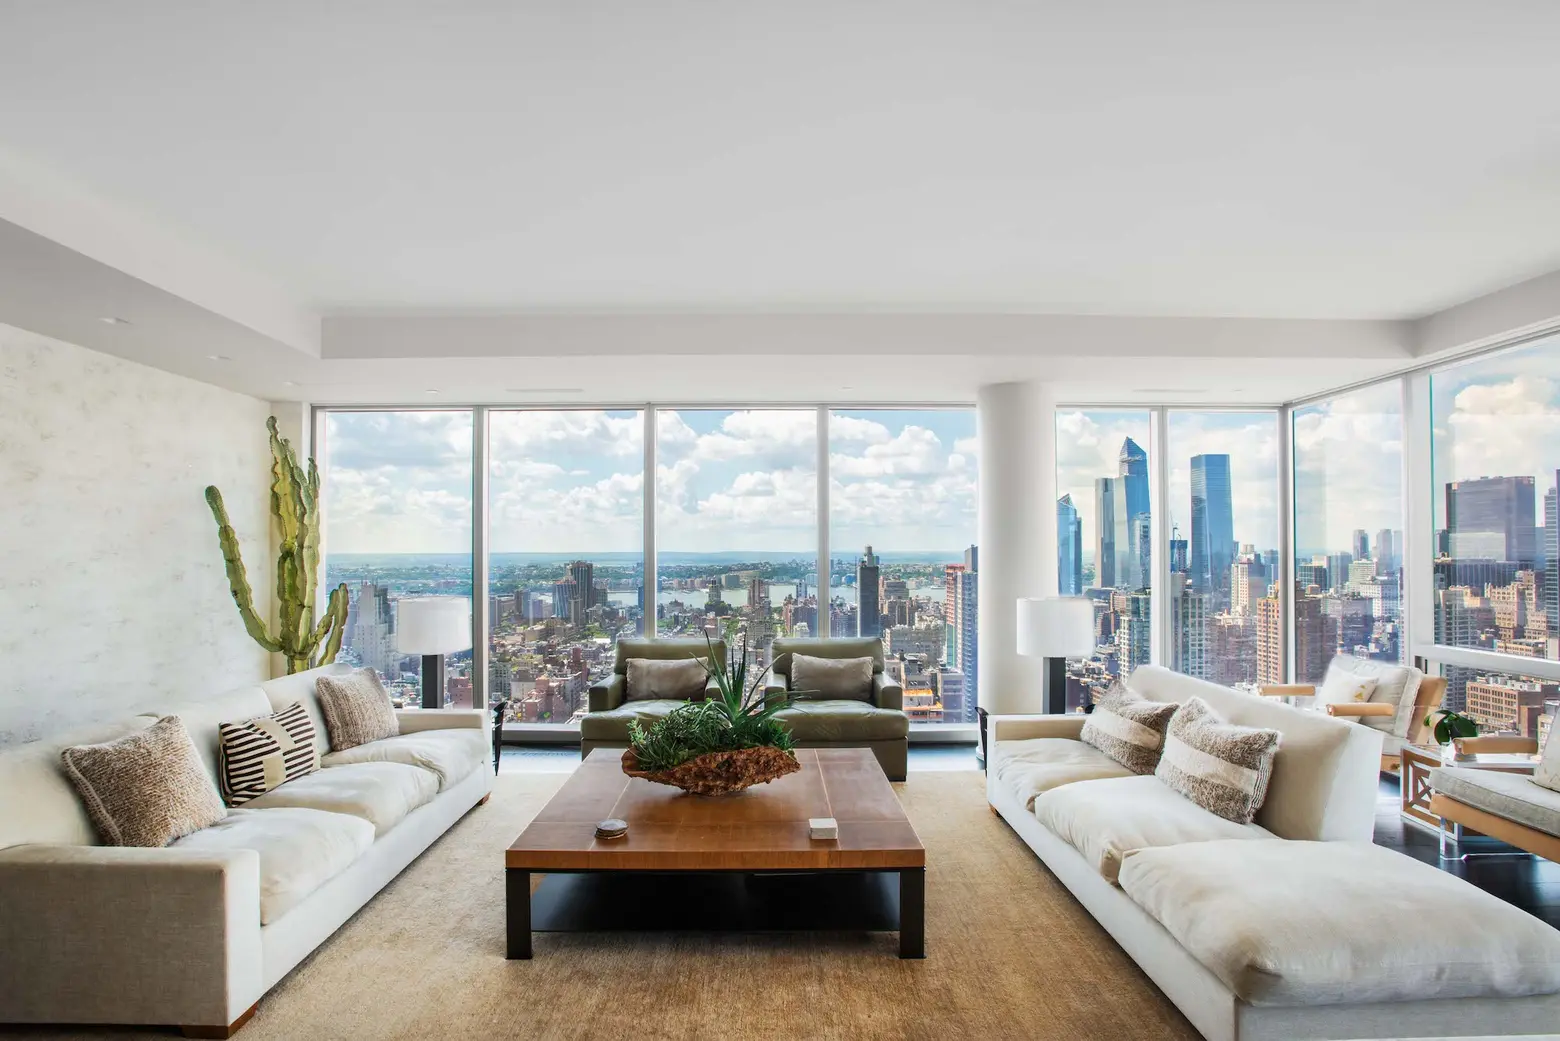 Tom Brady’s former Flatiron condo is back on the market for $13.7M